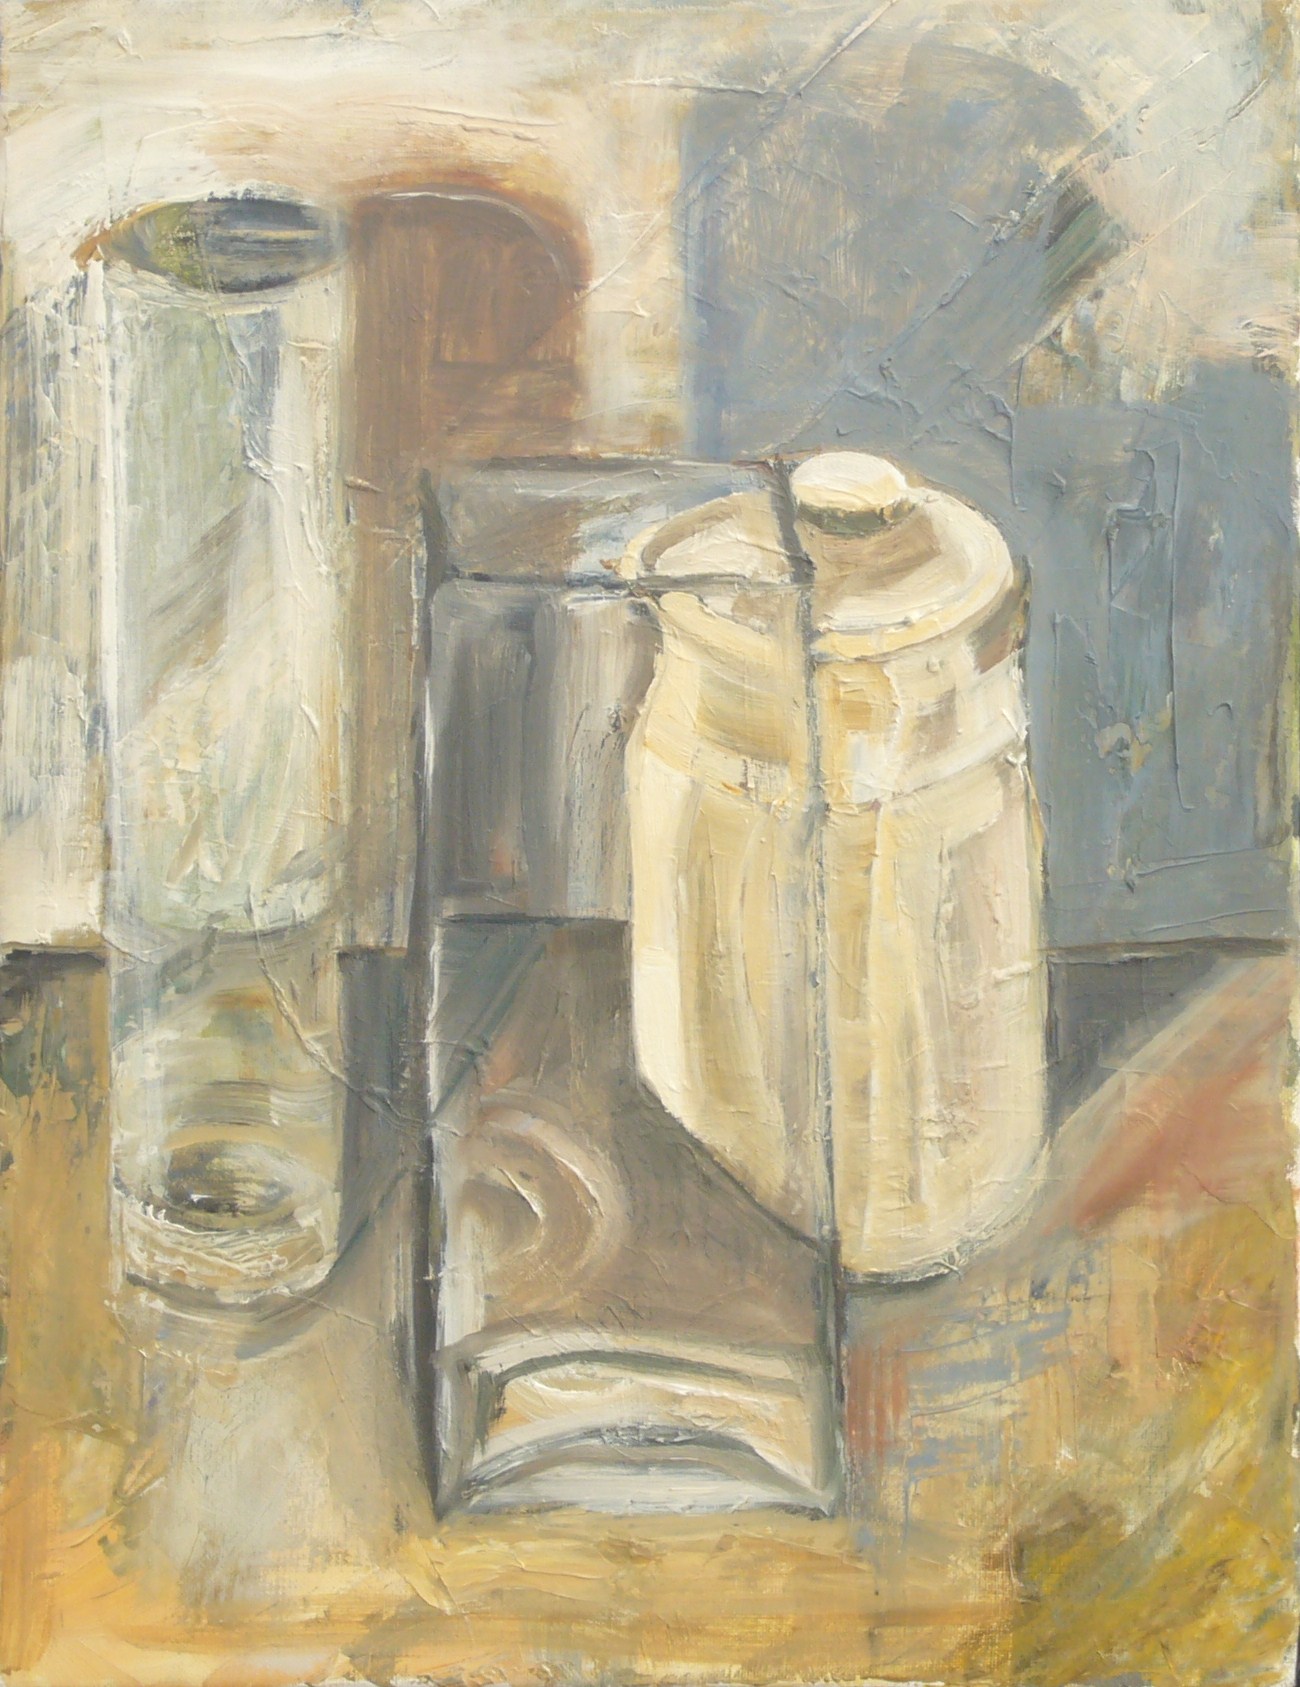 Glass and vase